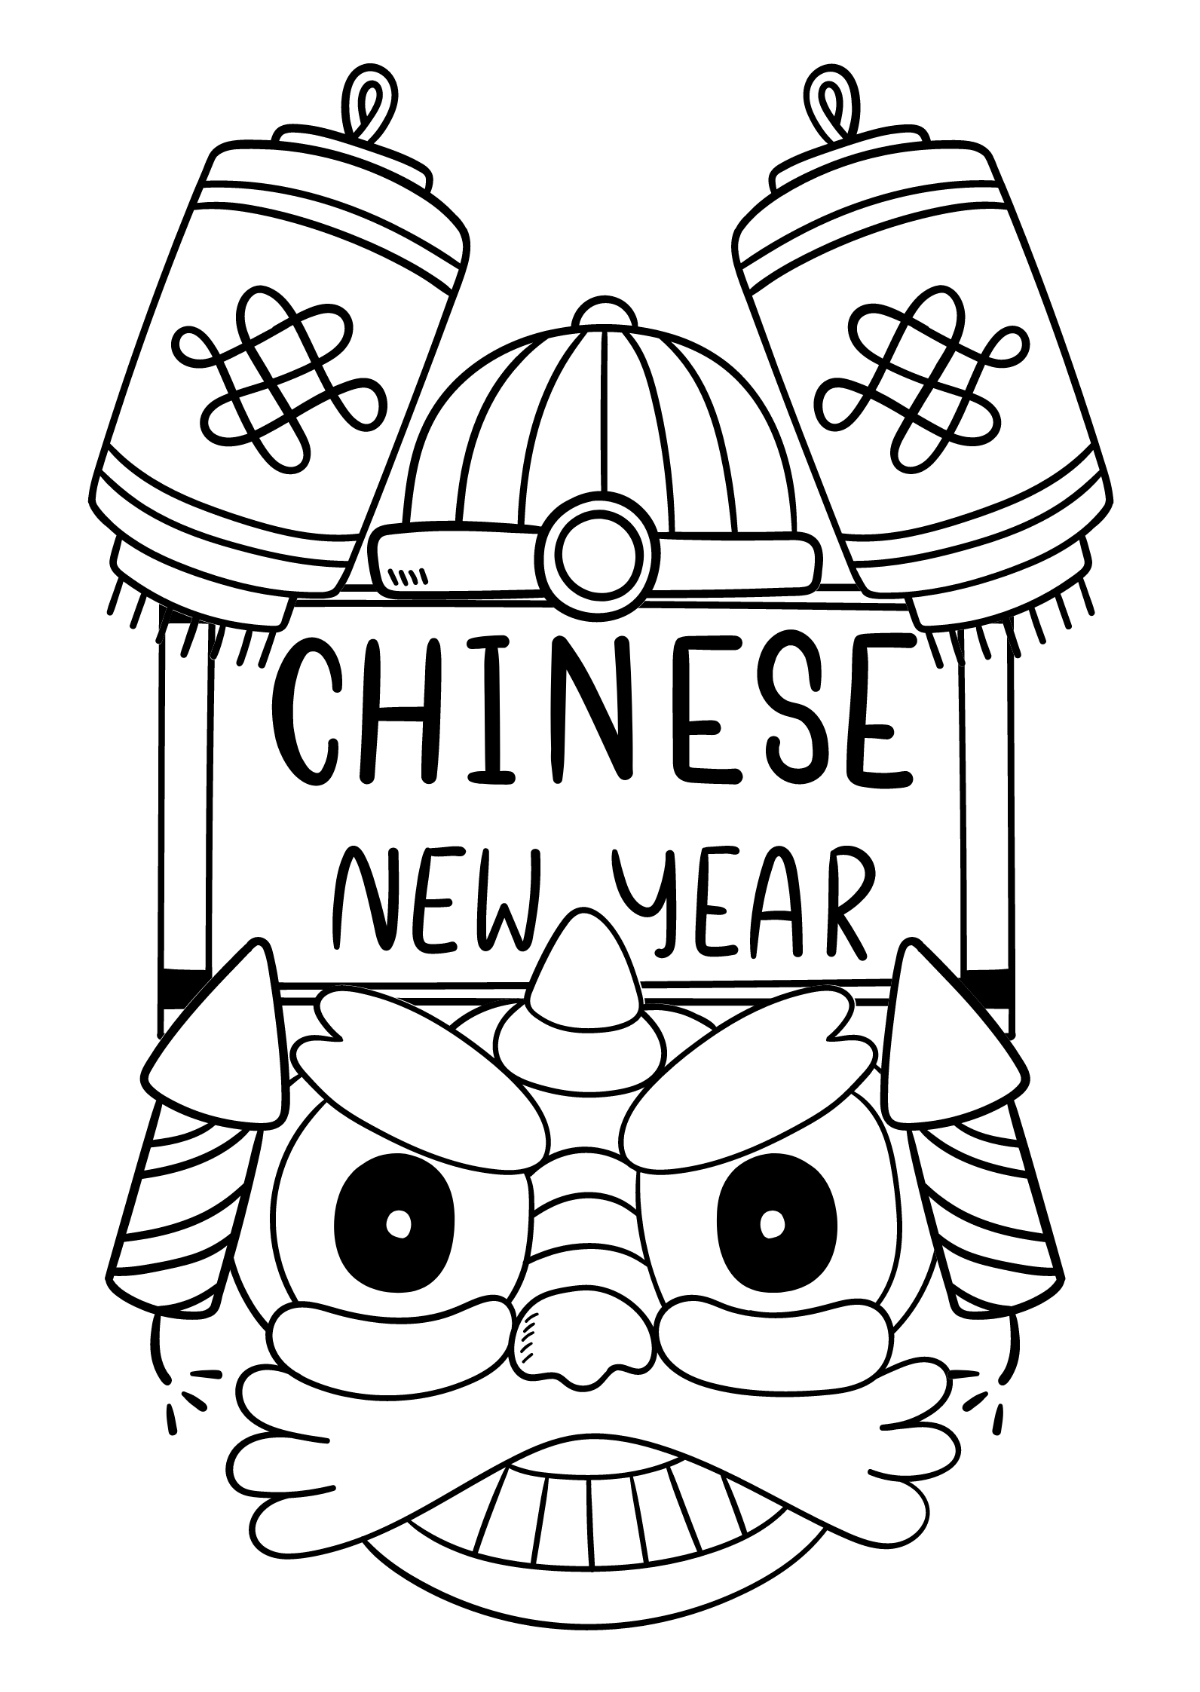 Chinese New Year Image Drawing Template